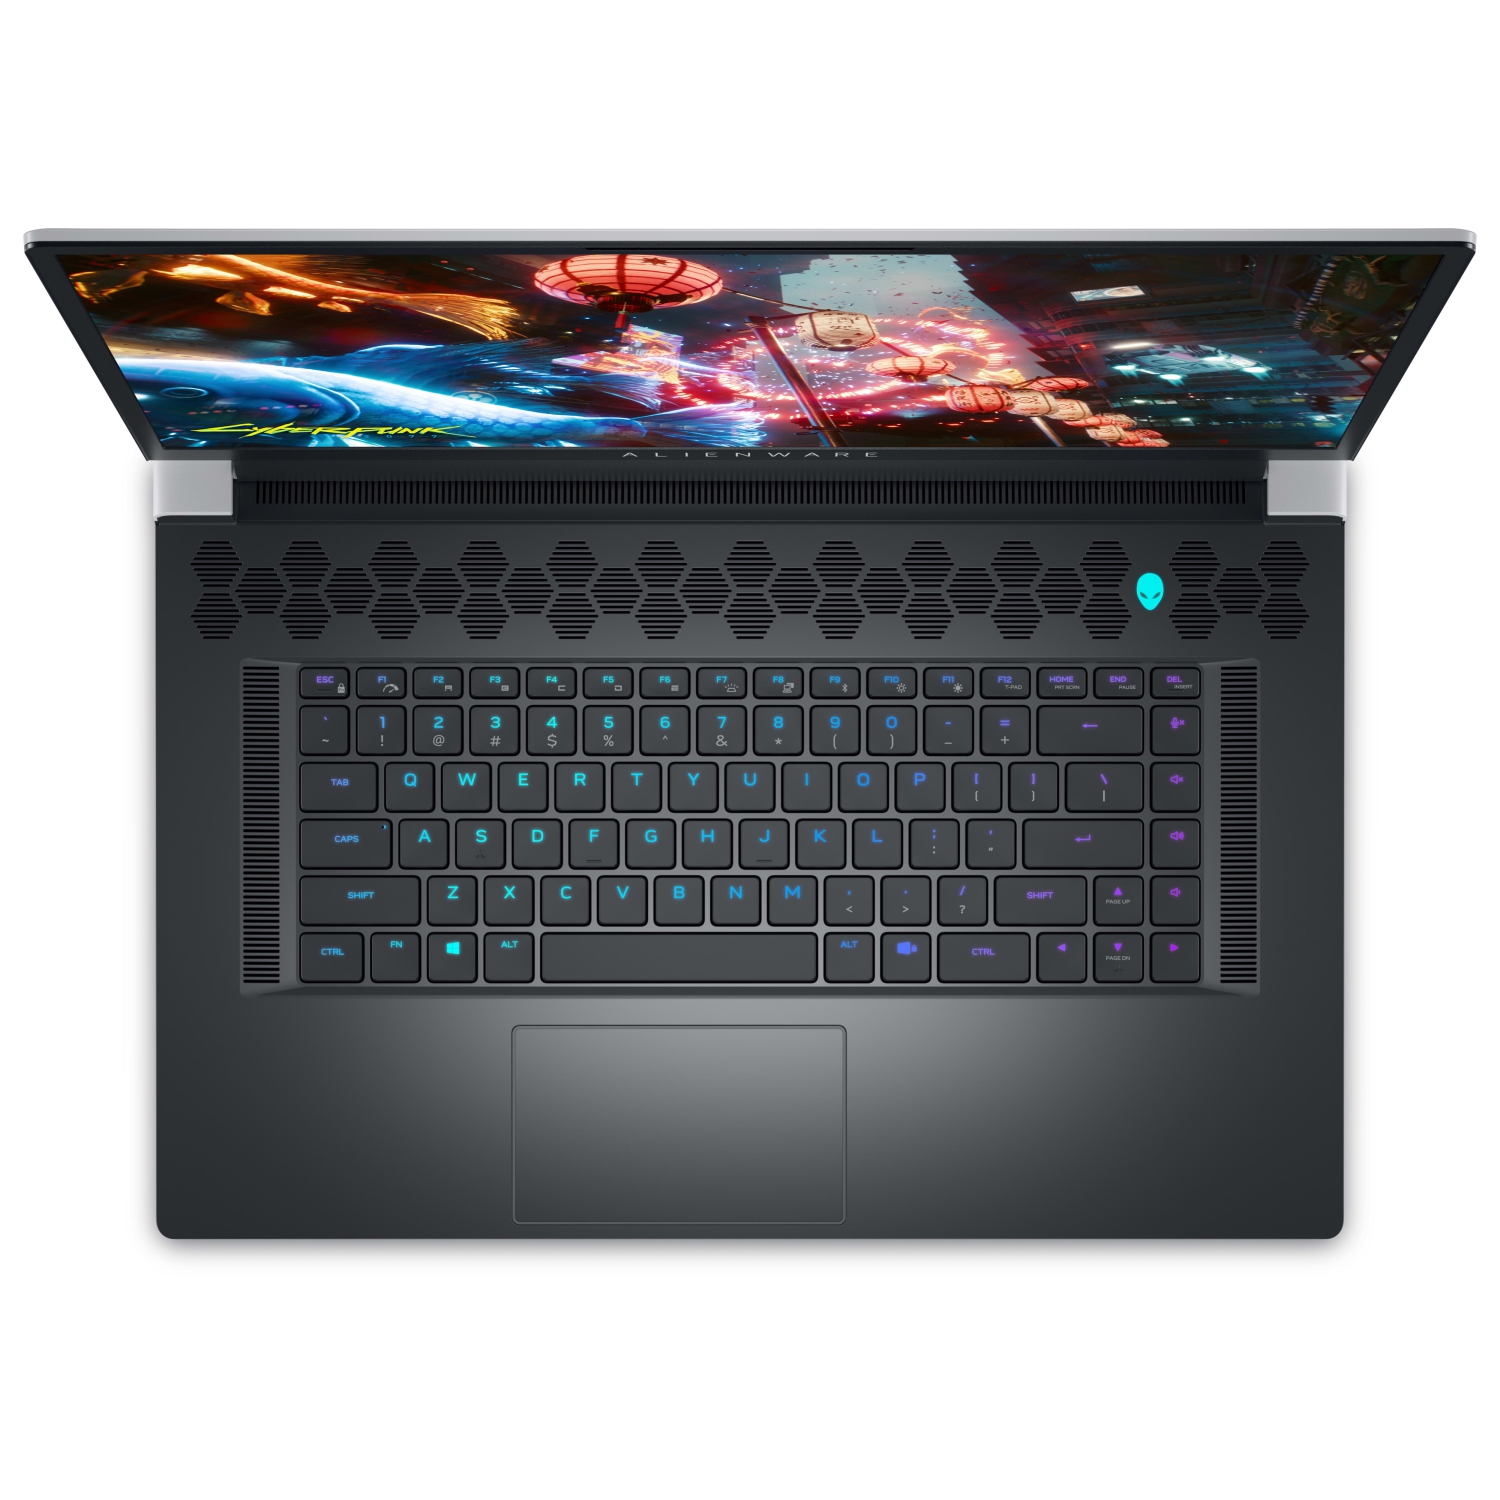 Refurbished (Excellent) – Dell Alienware X17 R2 Gaming Laptop (2022) | 17.3" FHD | Core i7 - 512GB SSD - 64GB RAM - 3080 Ti | 14 Cores @ 4.7 GHz - 12th Gen CPU - 12GB GDDR6X